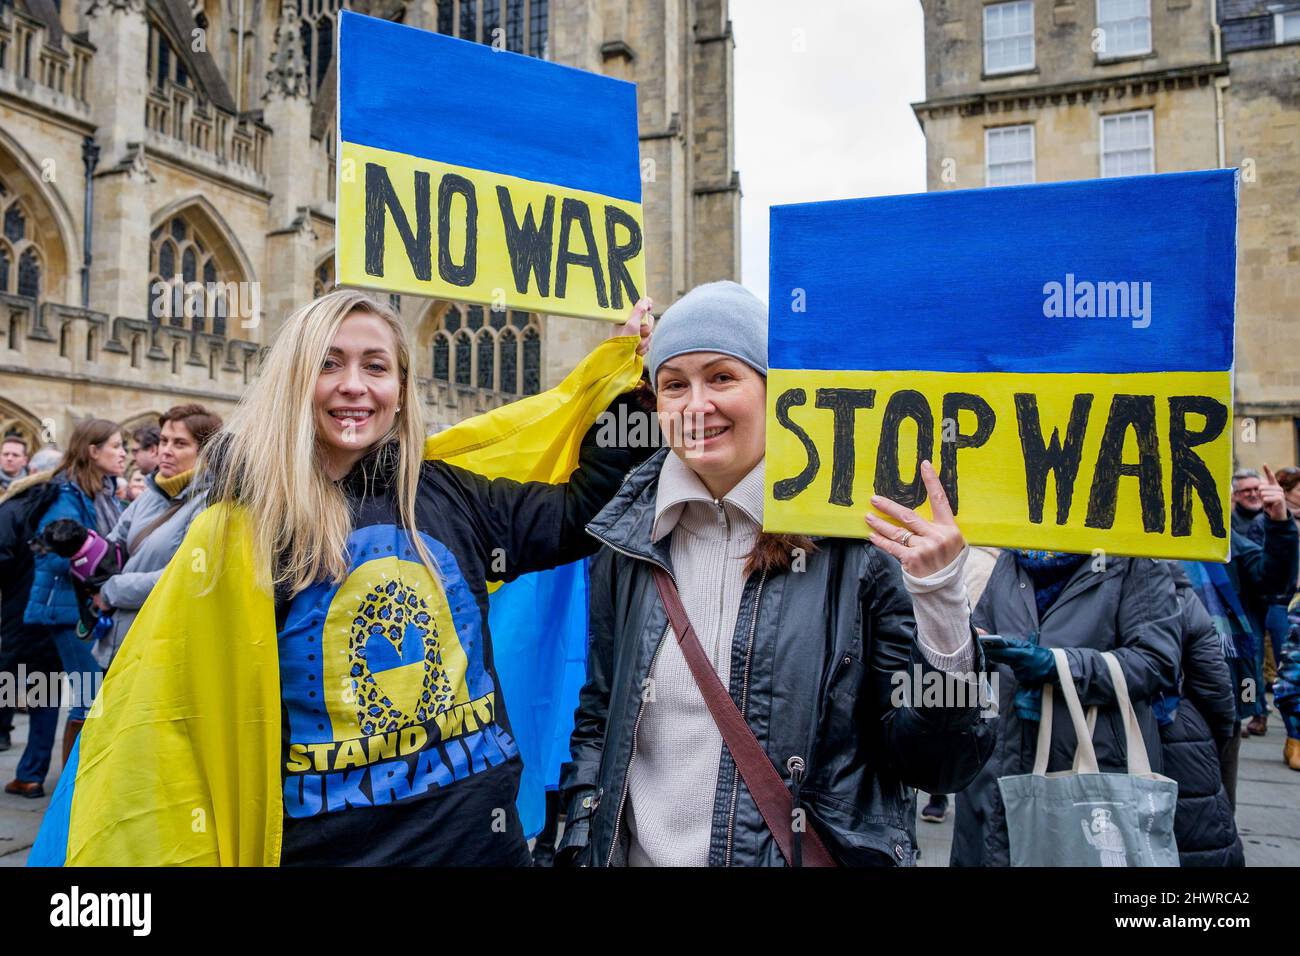 Protestors hold up stop the war placards as they listen to speeches in front of Bath Abbey during a demonstration against Russia's invasion of Ukraine Stock Photo